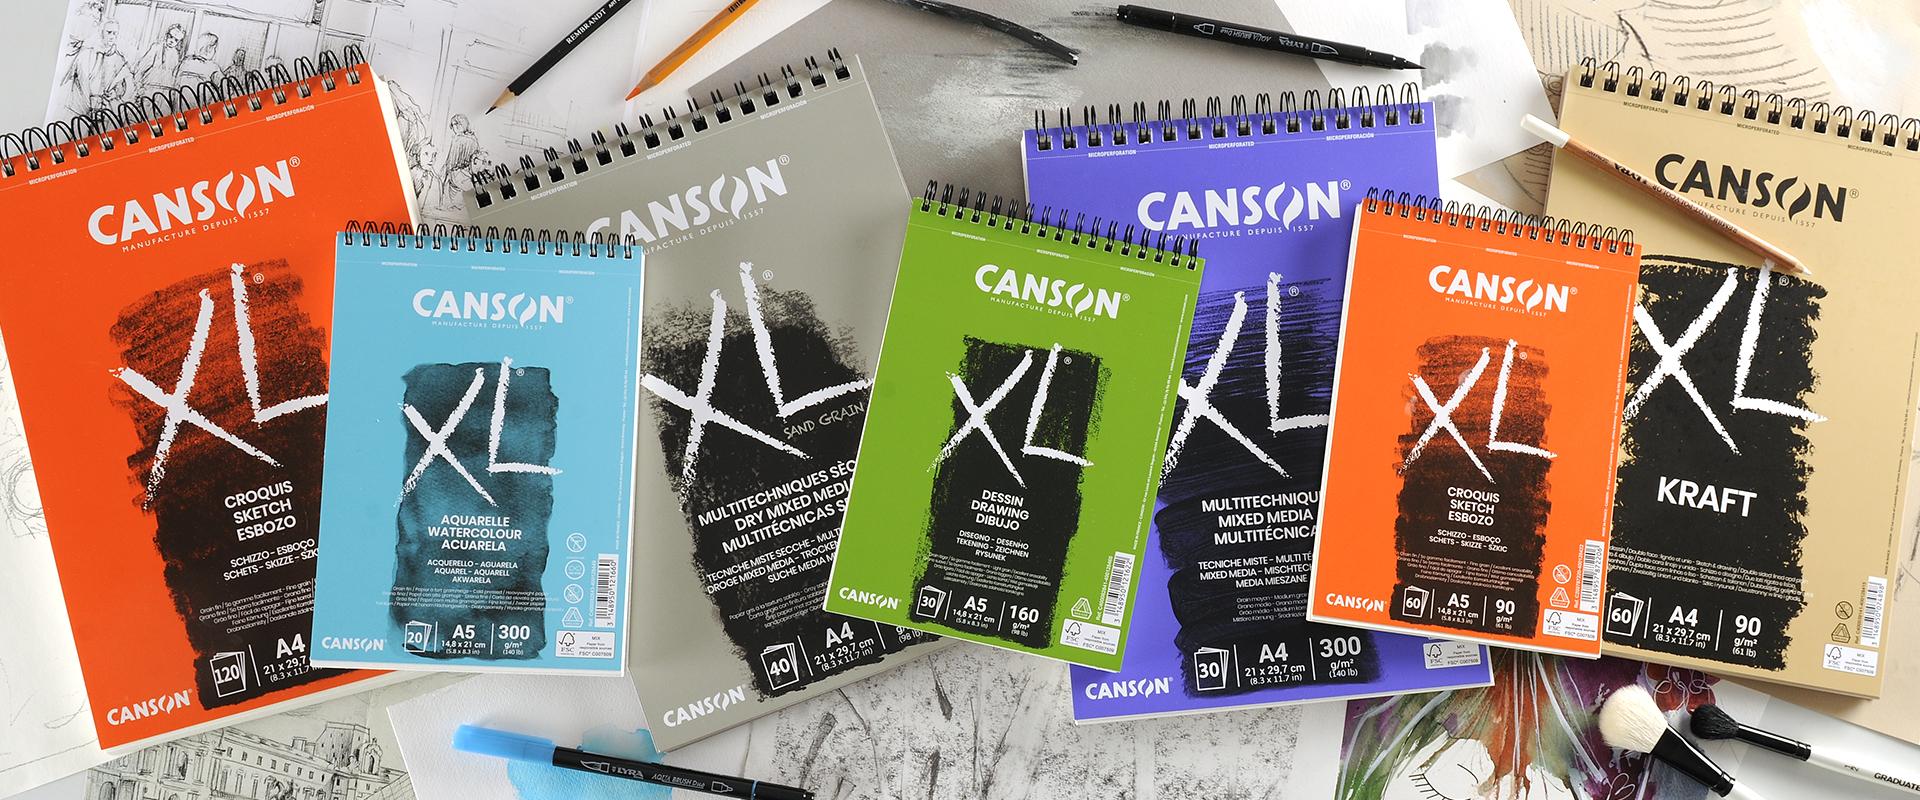 Canson XL Series Mix Paper Pad, Sketch, Marker, Acrylic